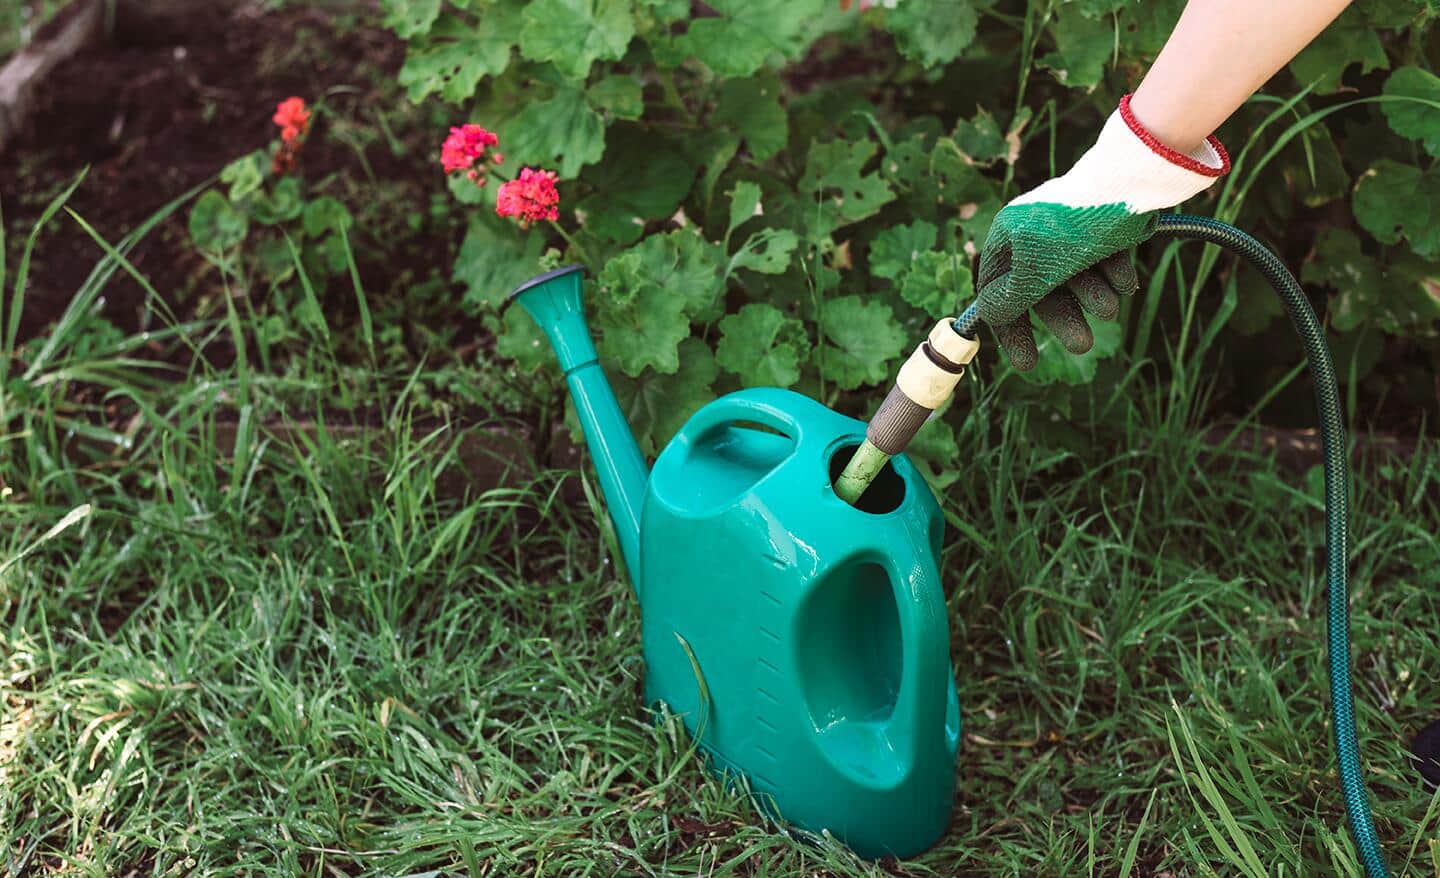 Gardener uses a hose to fill a watering can in a garden